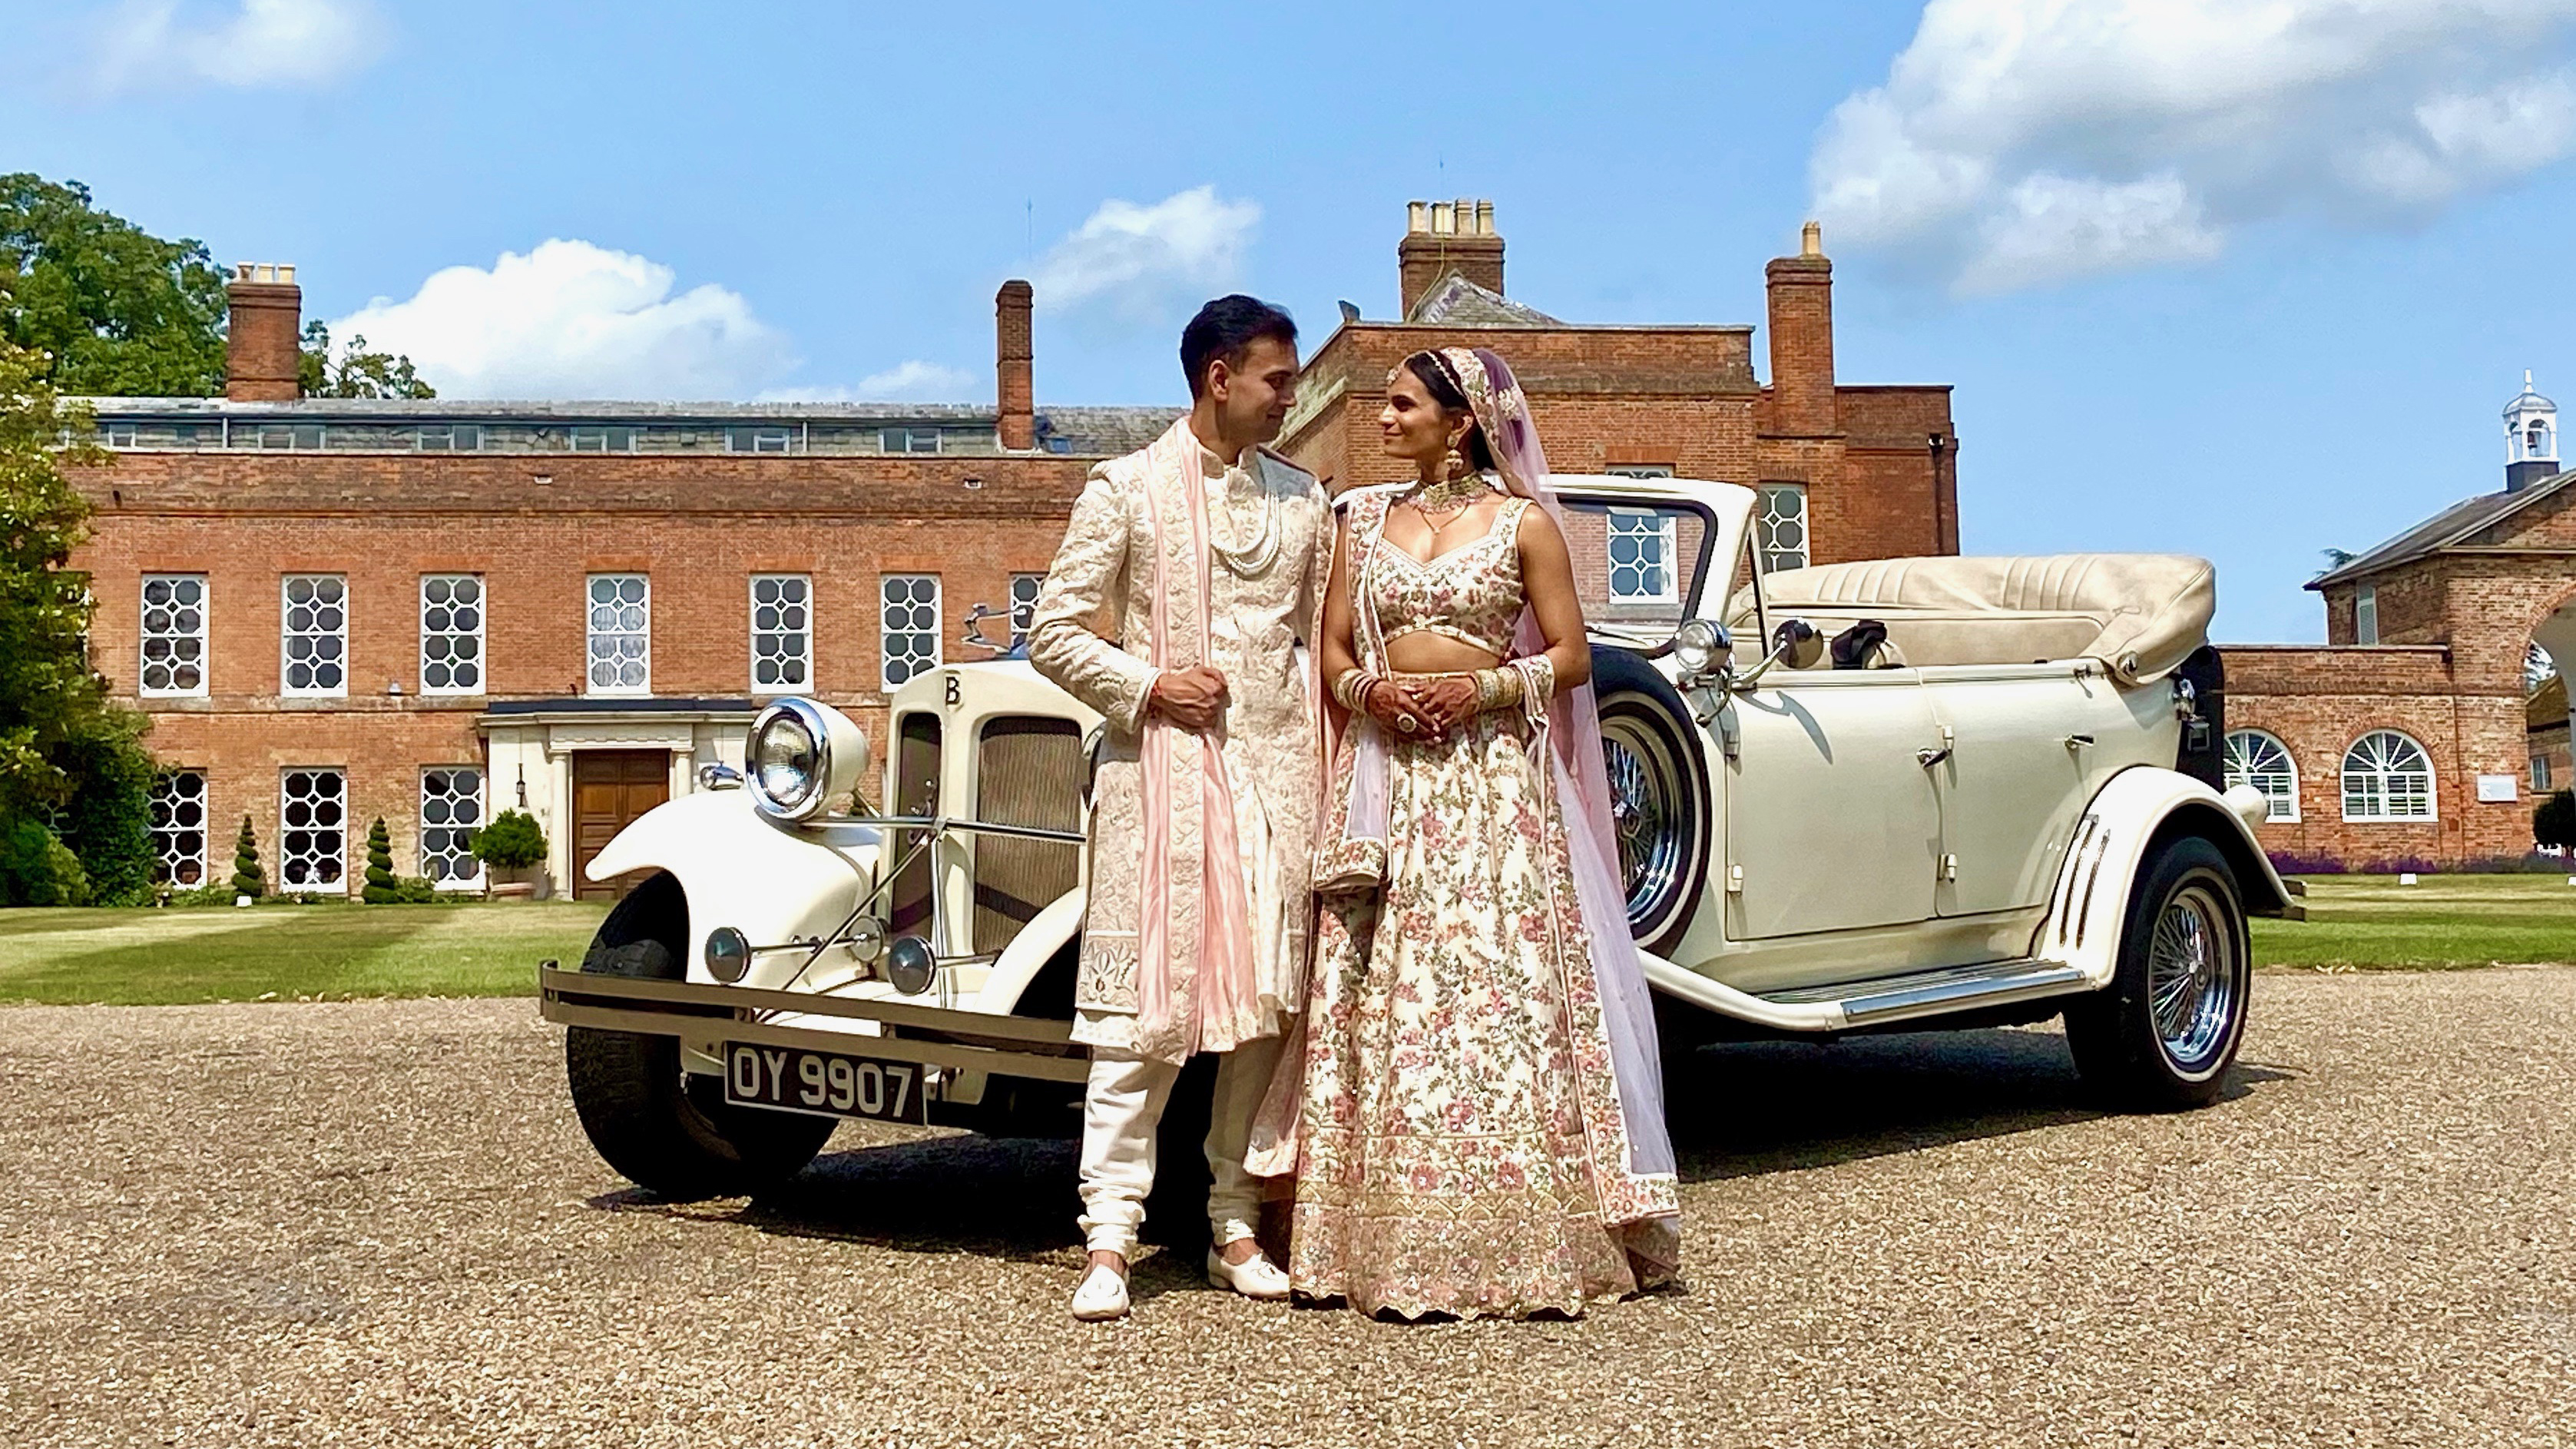 Convertible vintage style Beauford with roof down with newly wed Asian couple standing in front of the vehicle looking at each others. Vehicle is parked in front of a large manor house in Romford